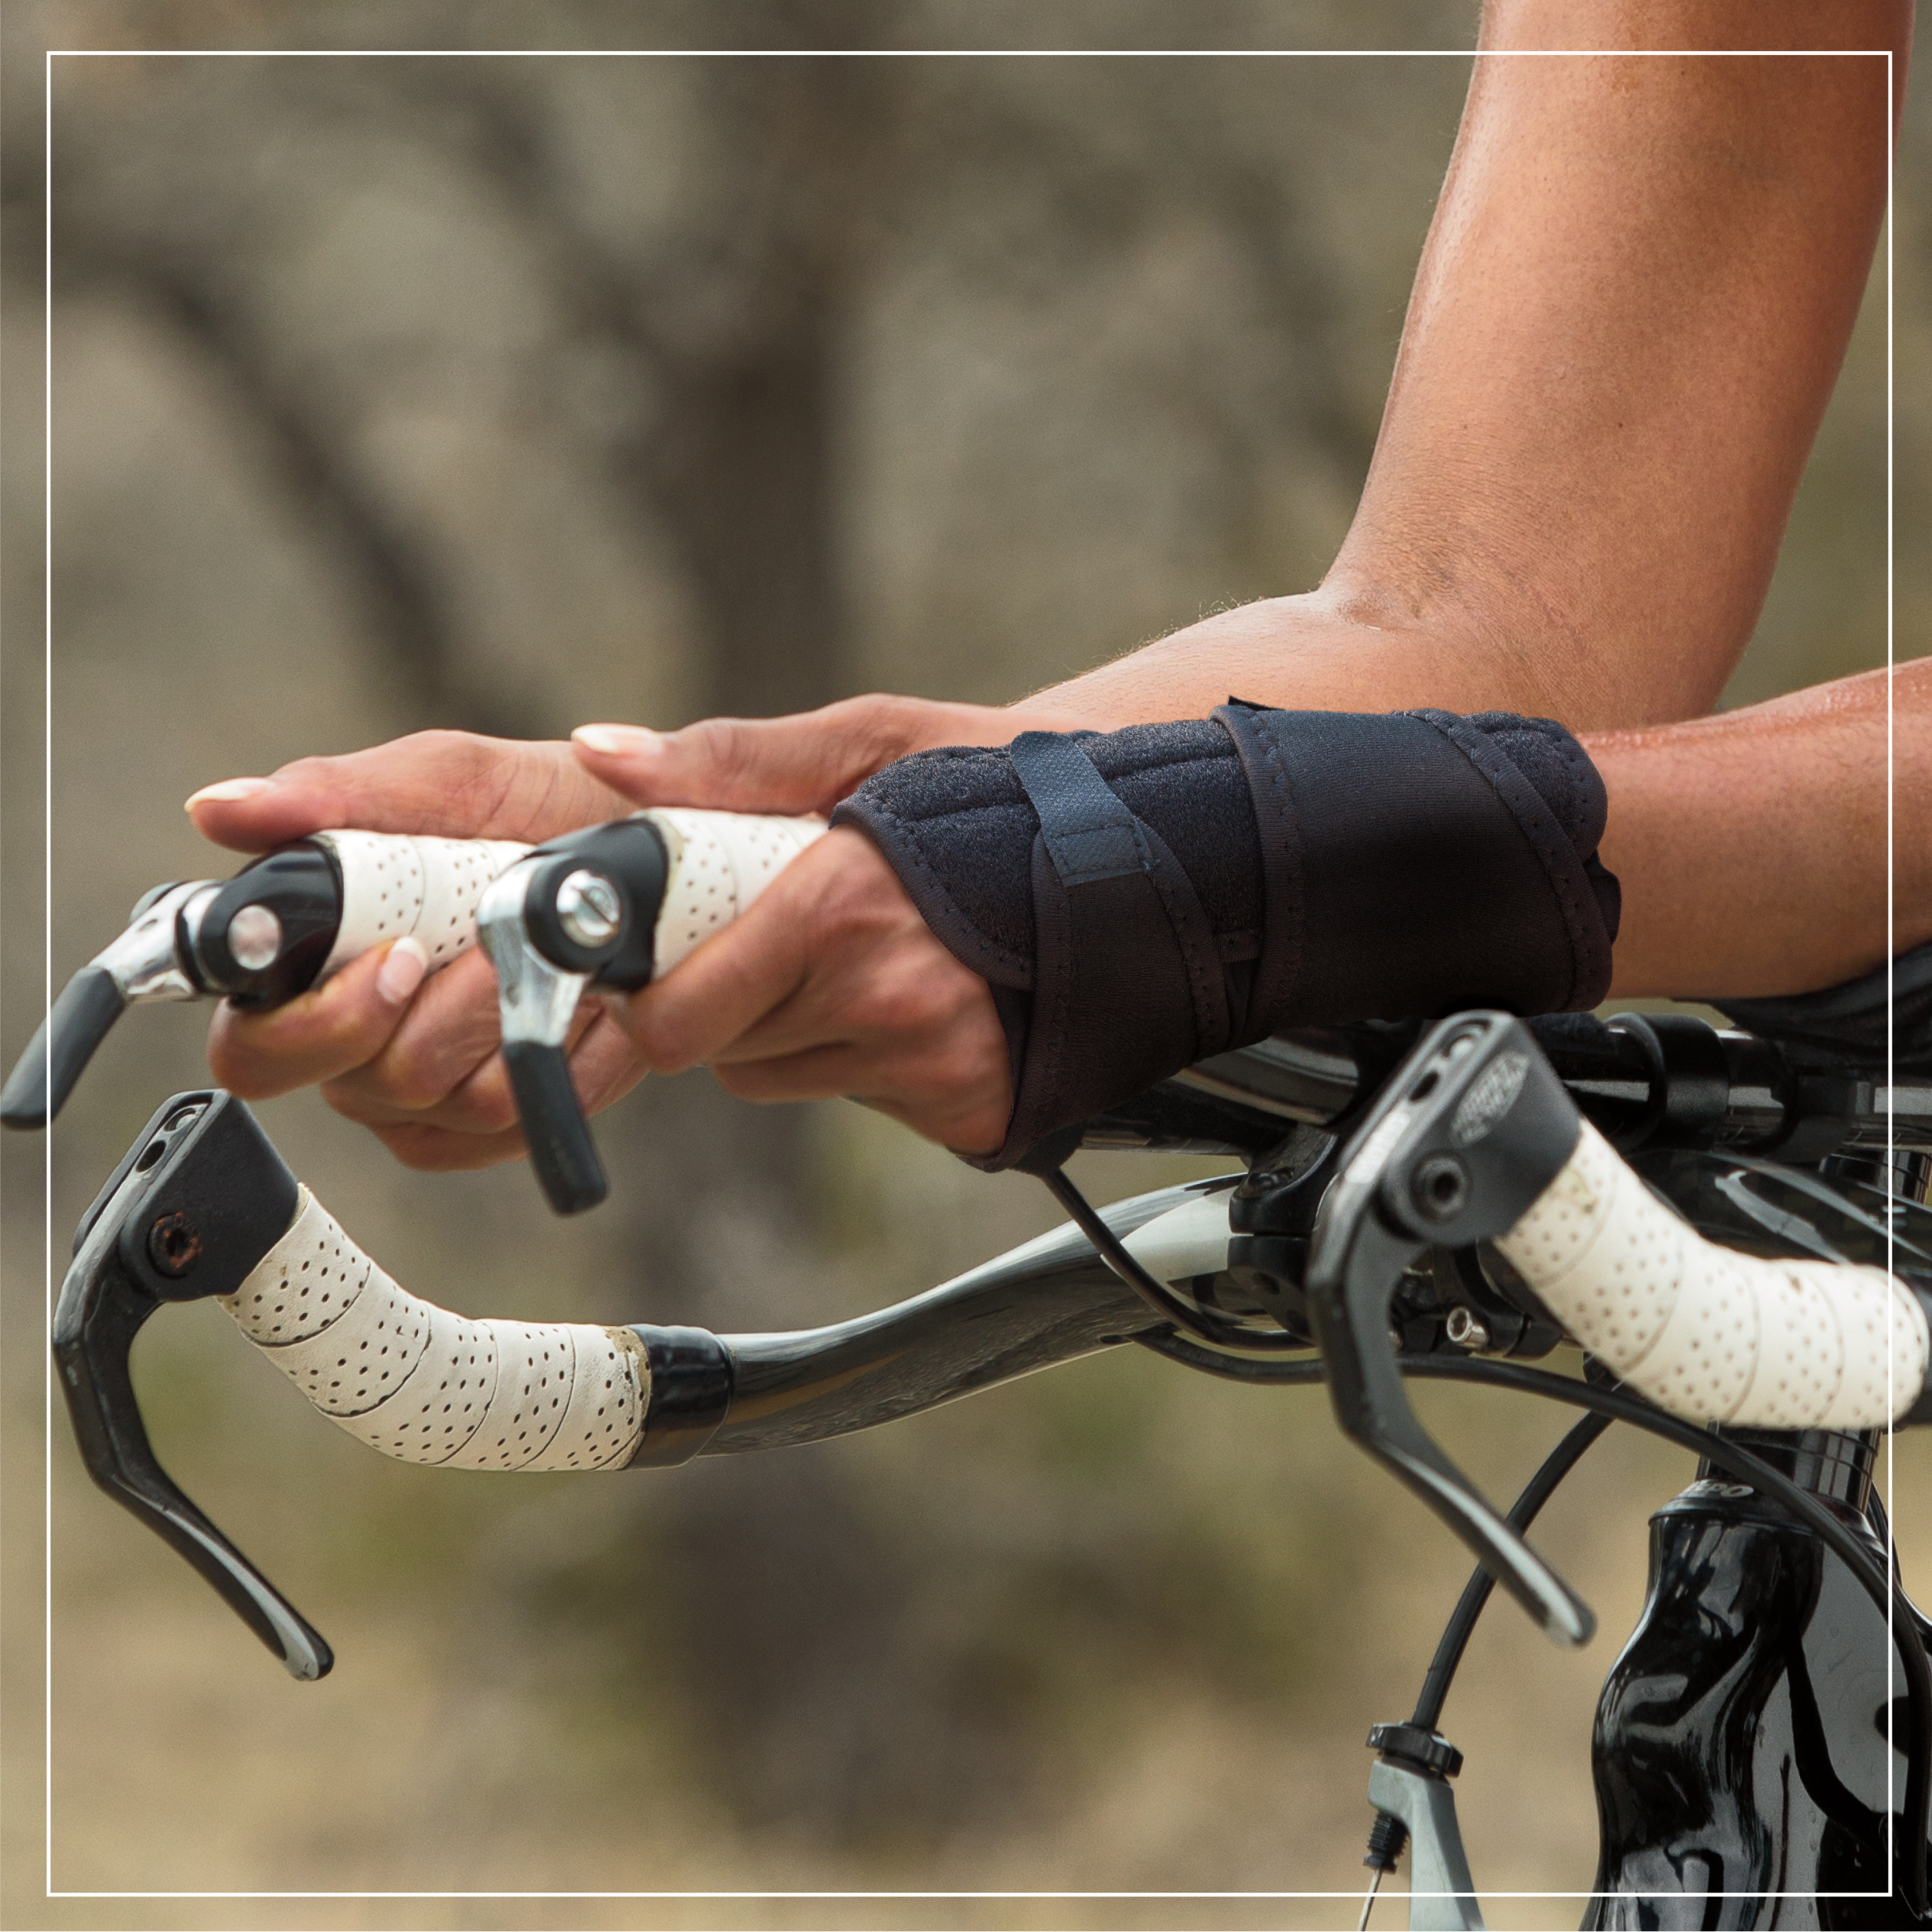 example of hand holding bike bars with brace on